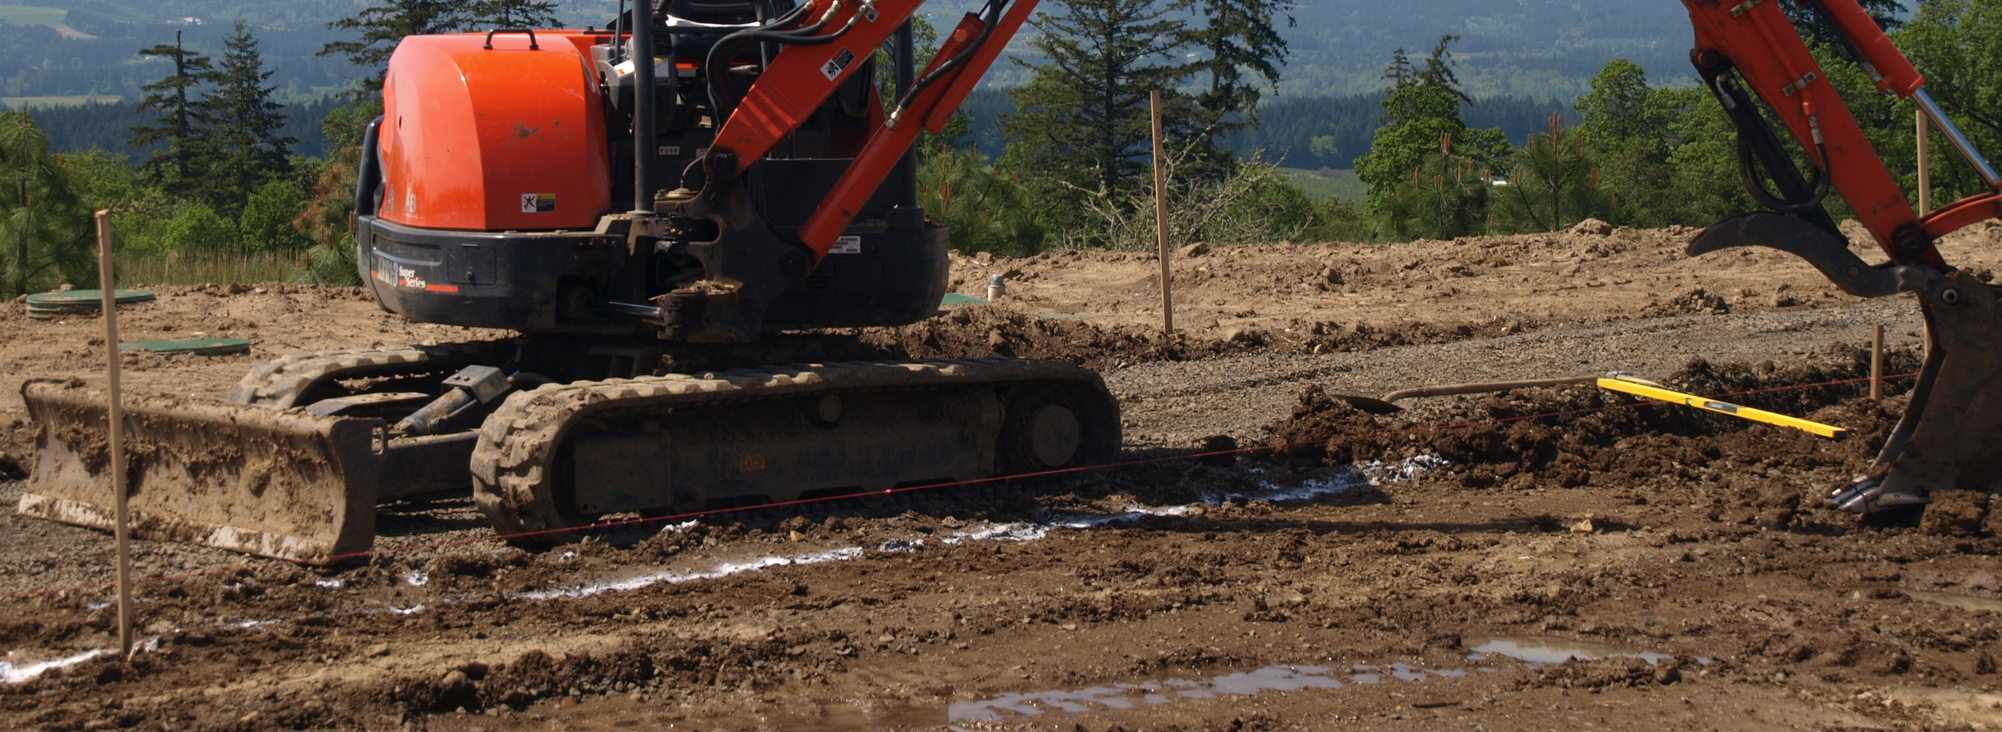 An orange construction digger with its bucket extended sits on a partially-leveled muddy parcel, on a sunny day with evergreen trees in the distance.